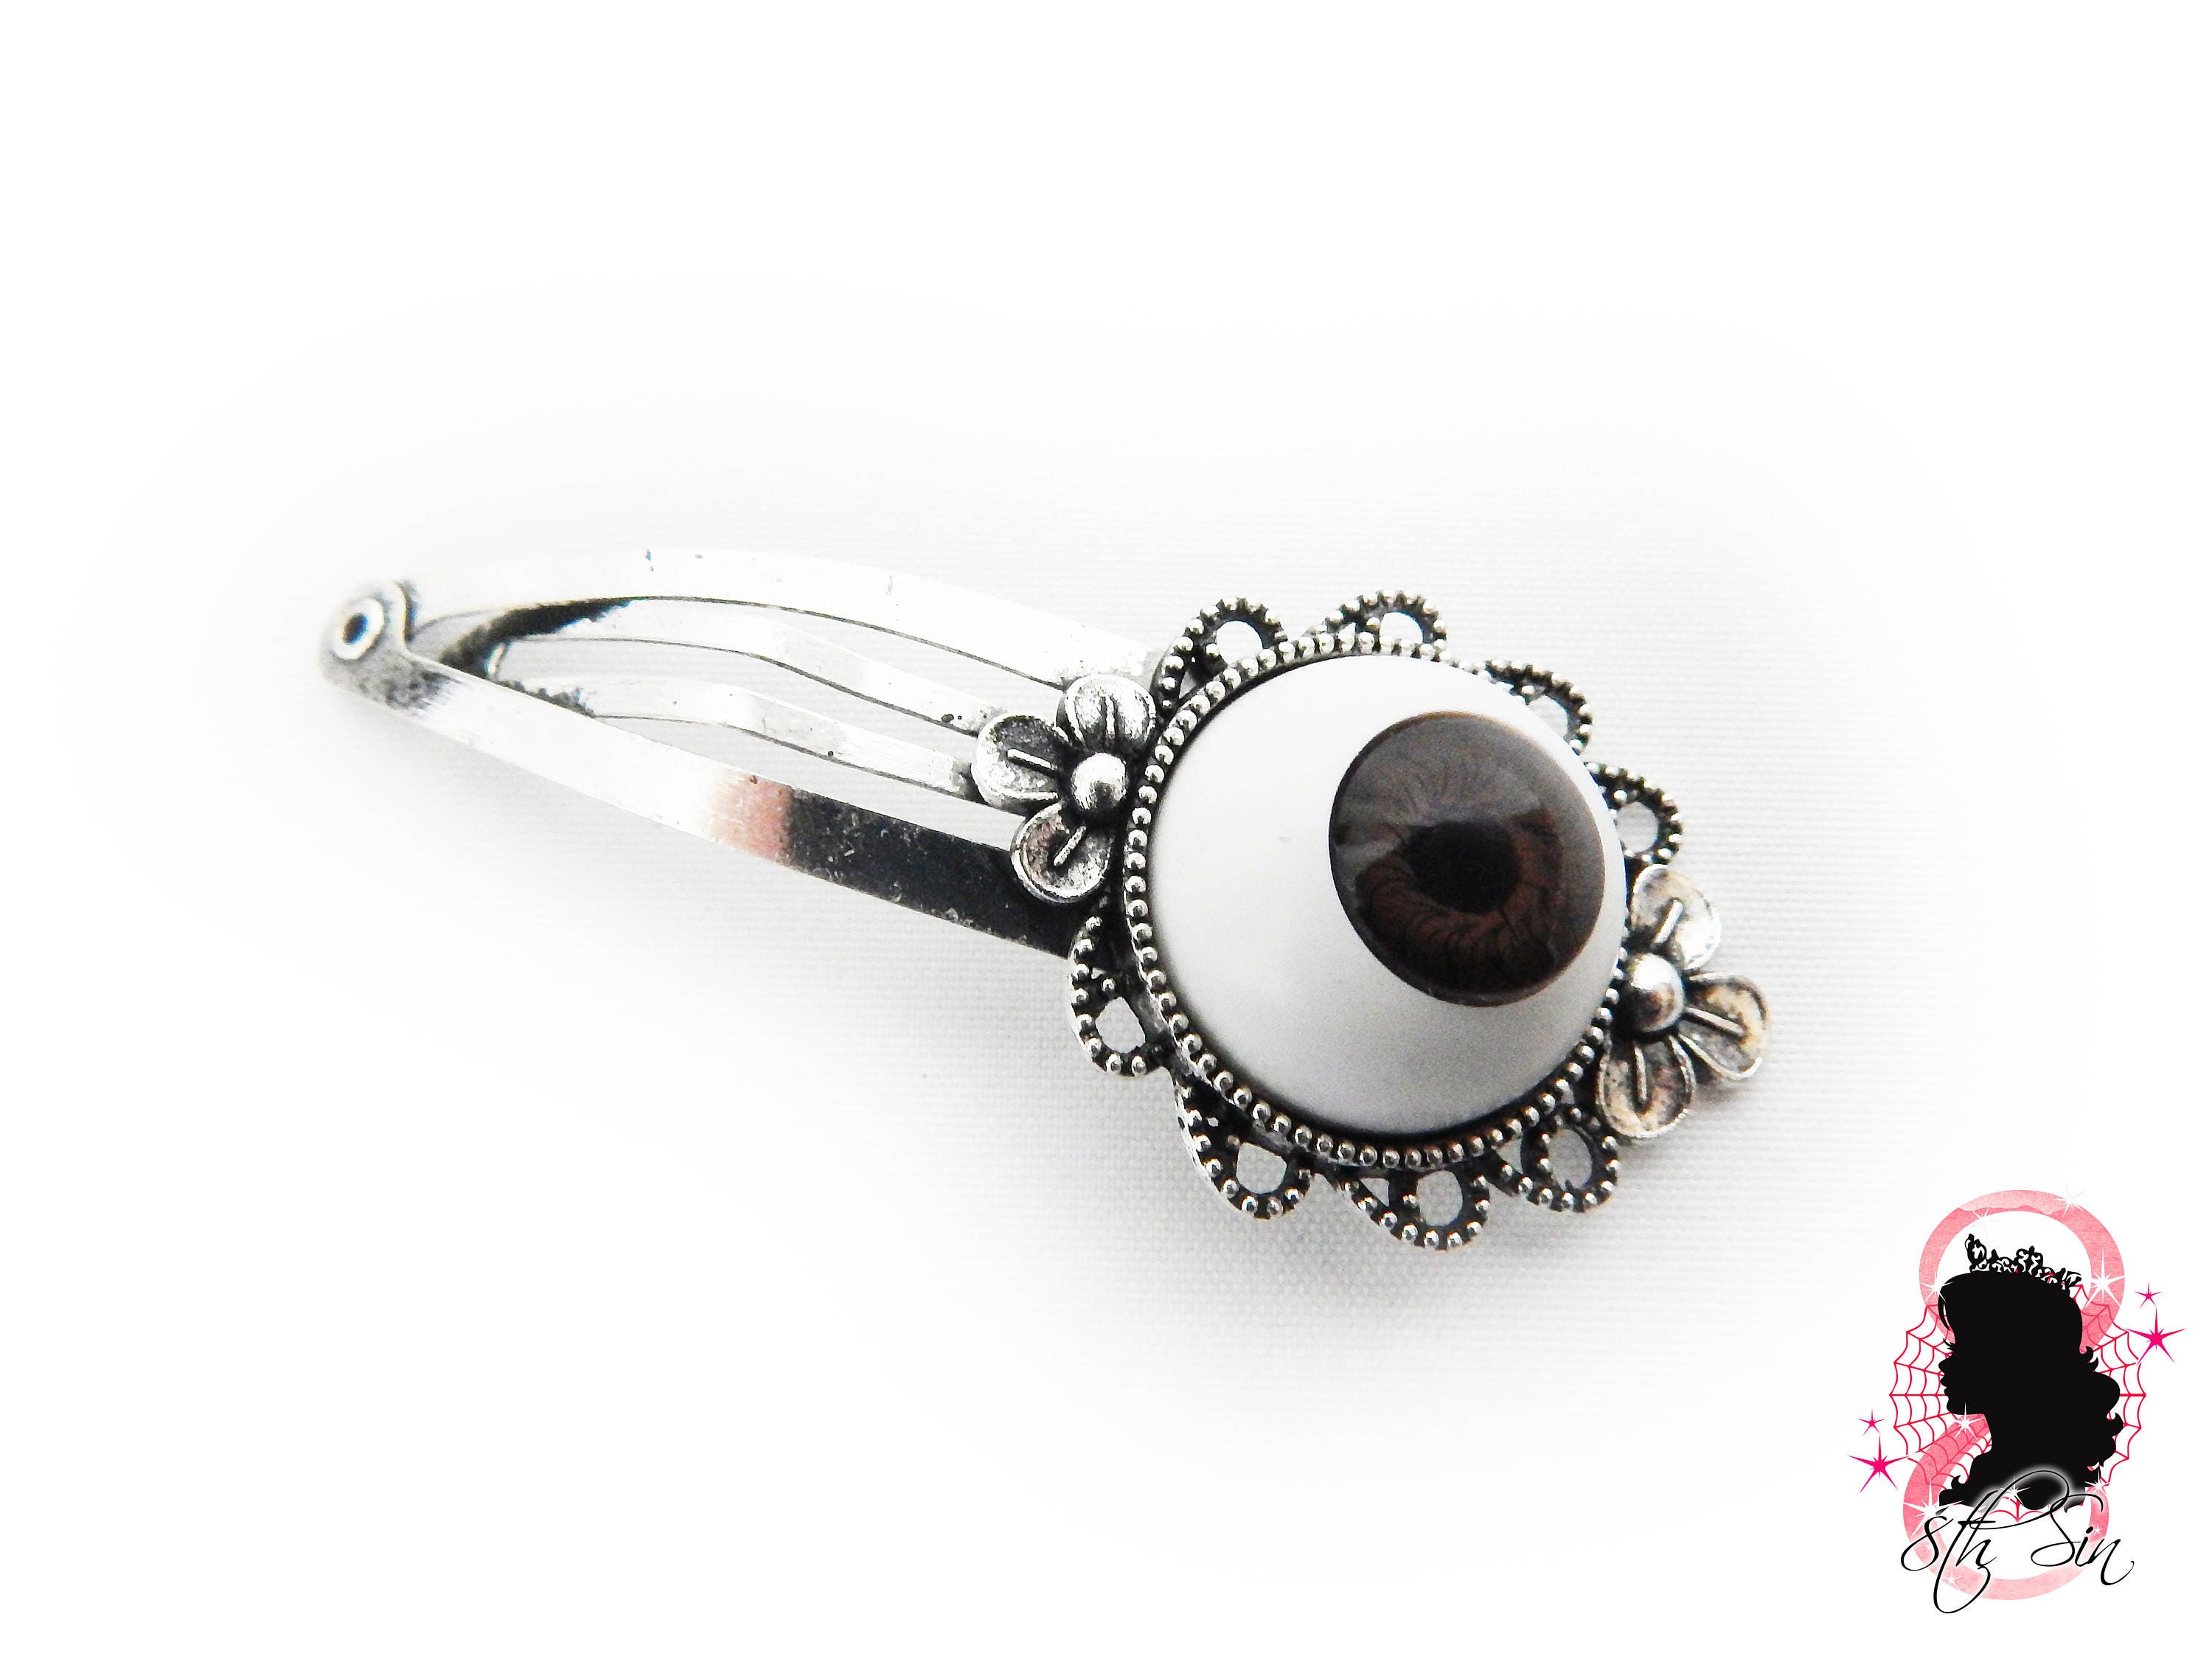 Antique Silver and Brown Eyeball Hair Clips, Evil Eye Hair Clips, Doll Eye Hair Clips, Brown Evil Eye Hair Clips, Silver Eyeball Hair Clips photo